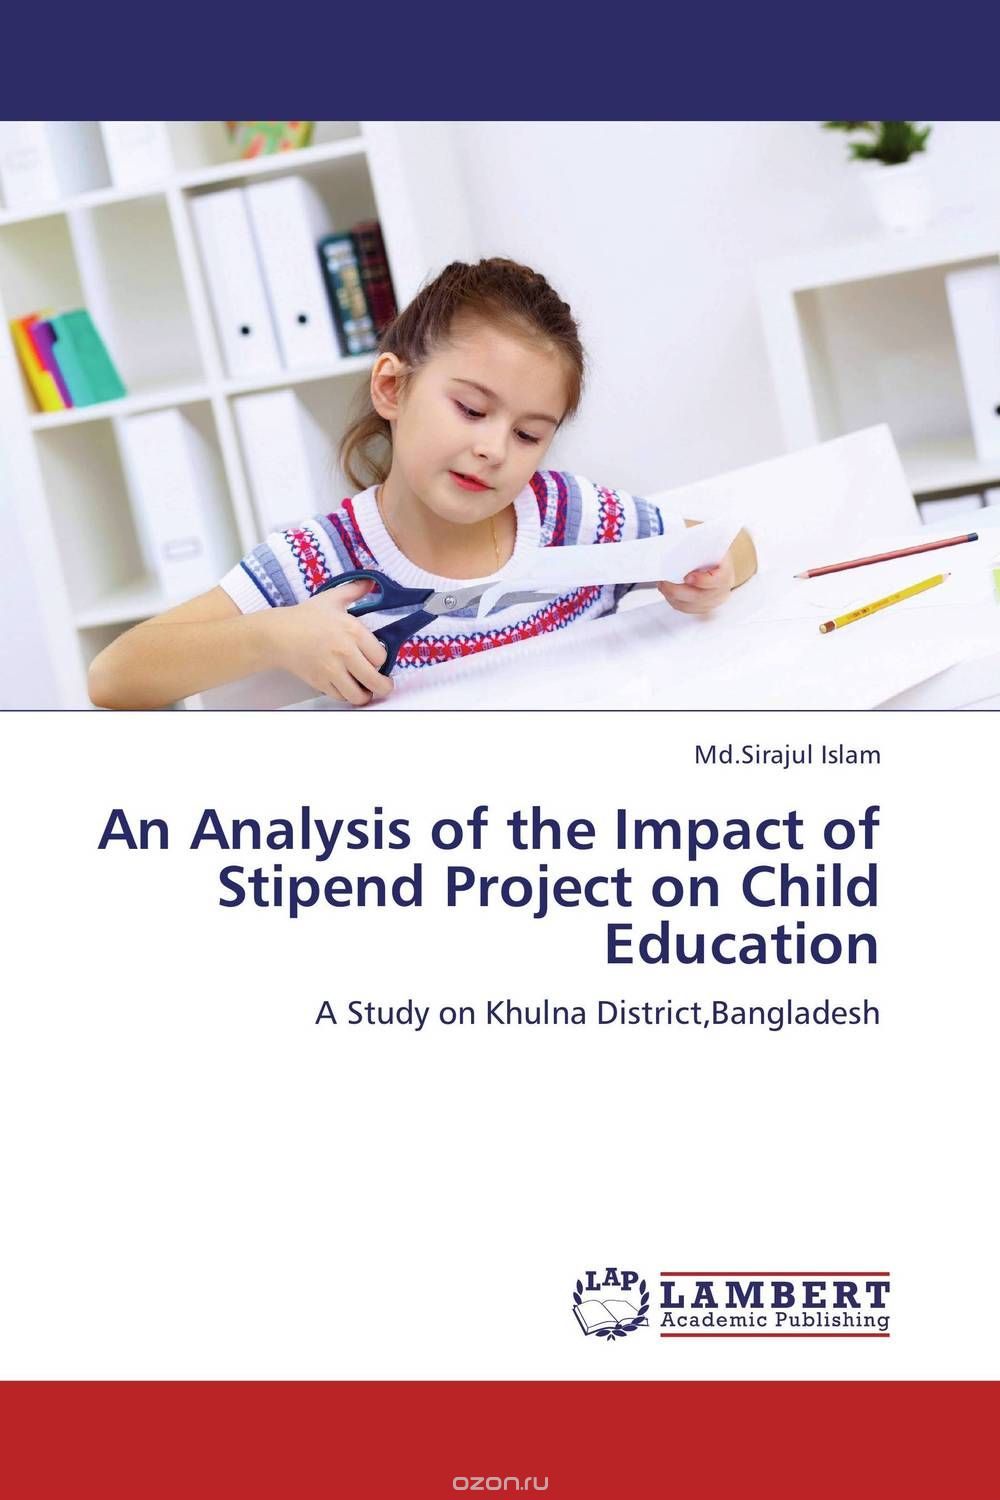 Скачать книгу "An Analysis of the Impact of Stipend Project on Child Education"